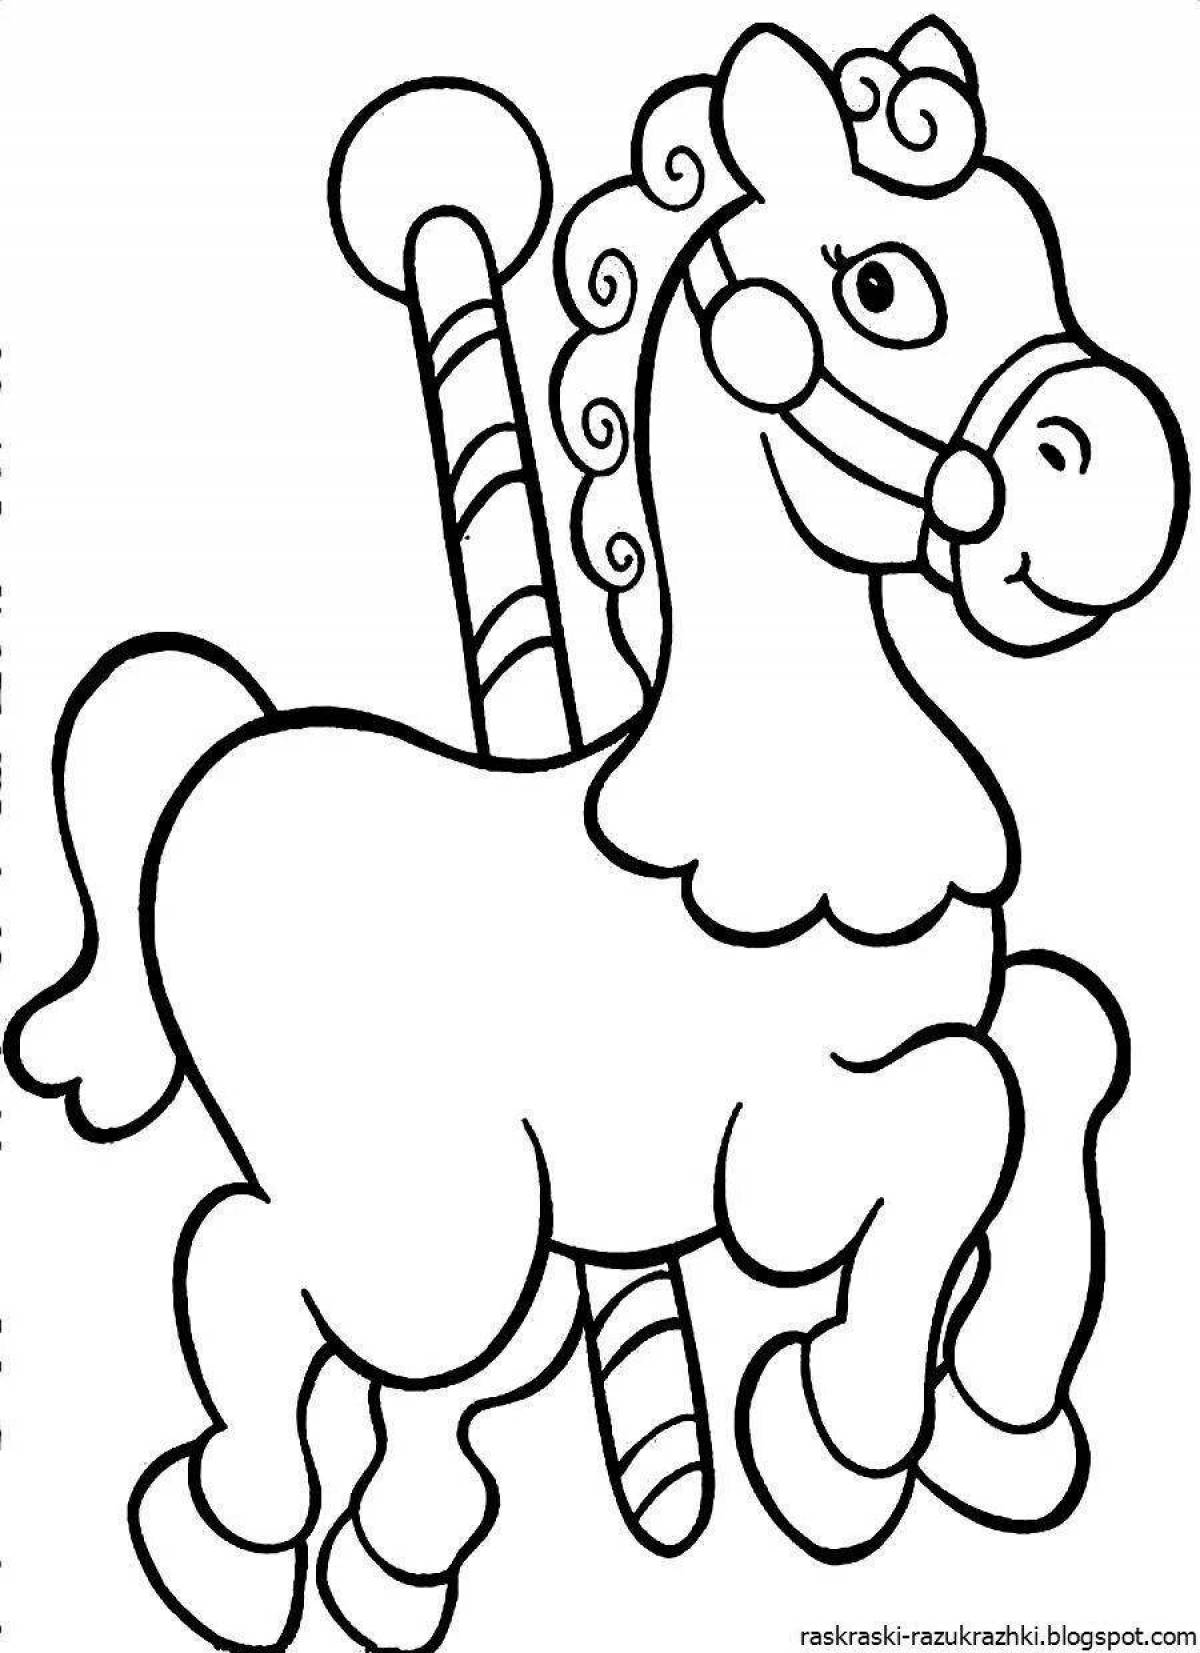 Adorable Christmas coloring book for kids